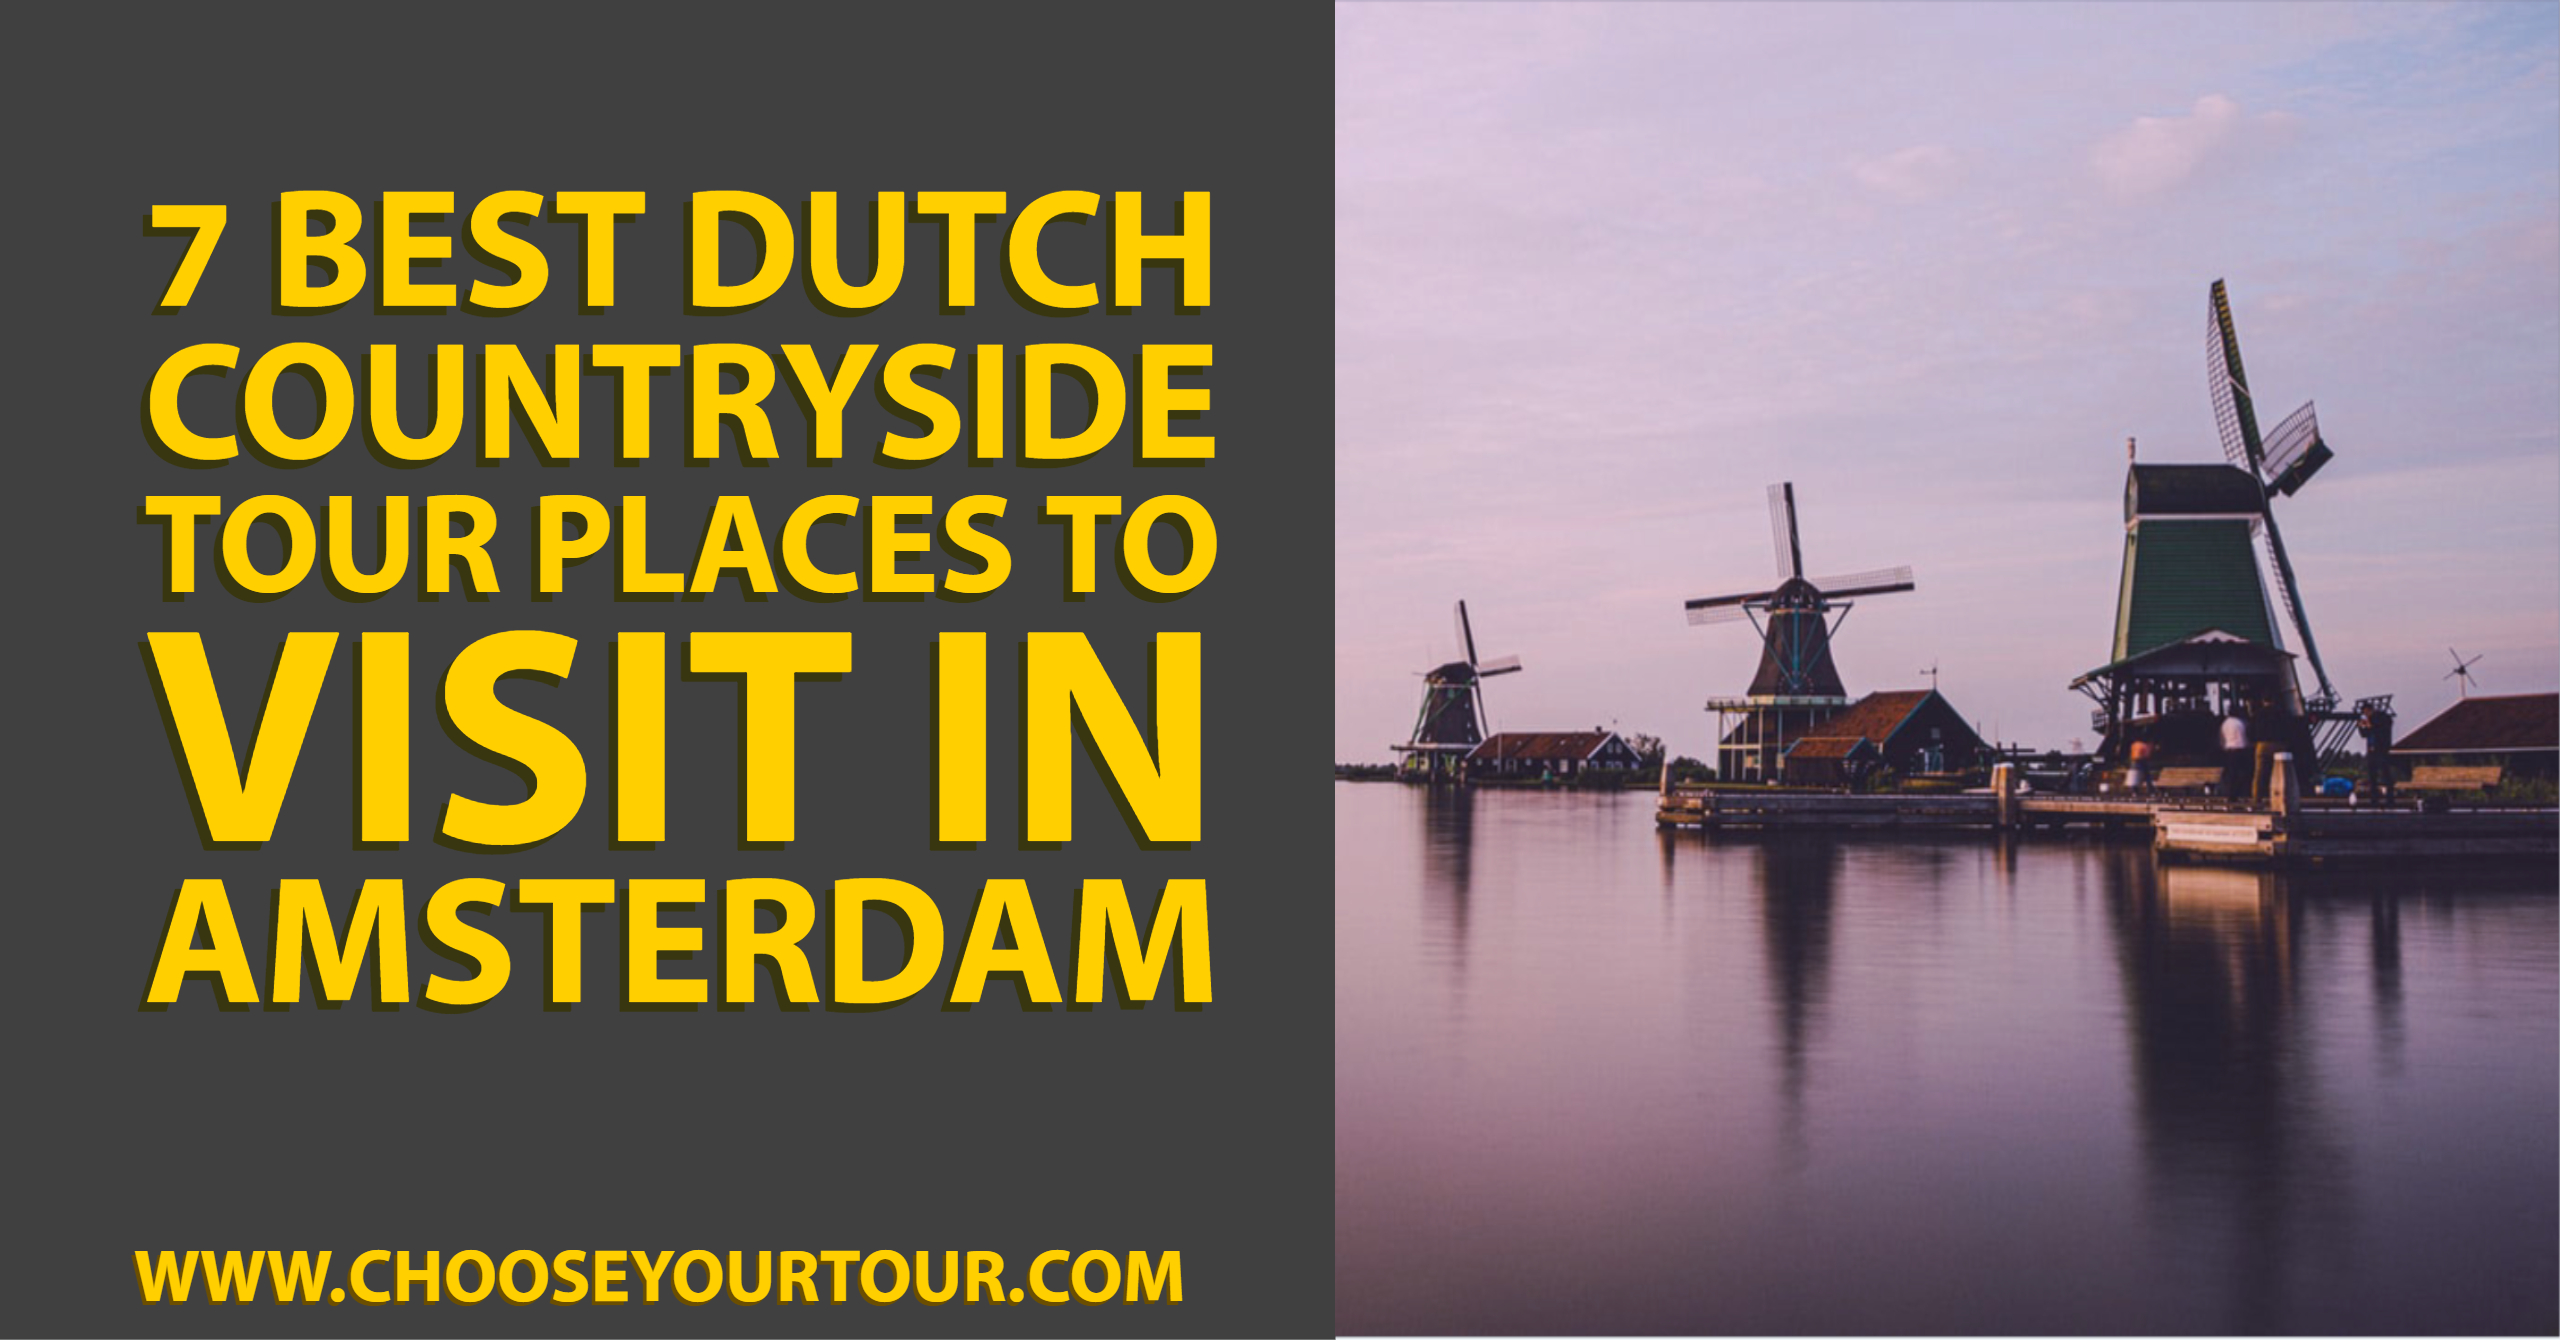 7 Best Dutch Countryside Tour Places to Visit in Amsterdam